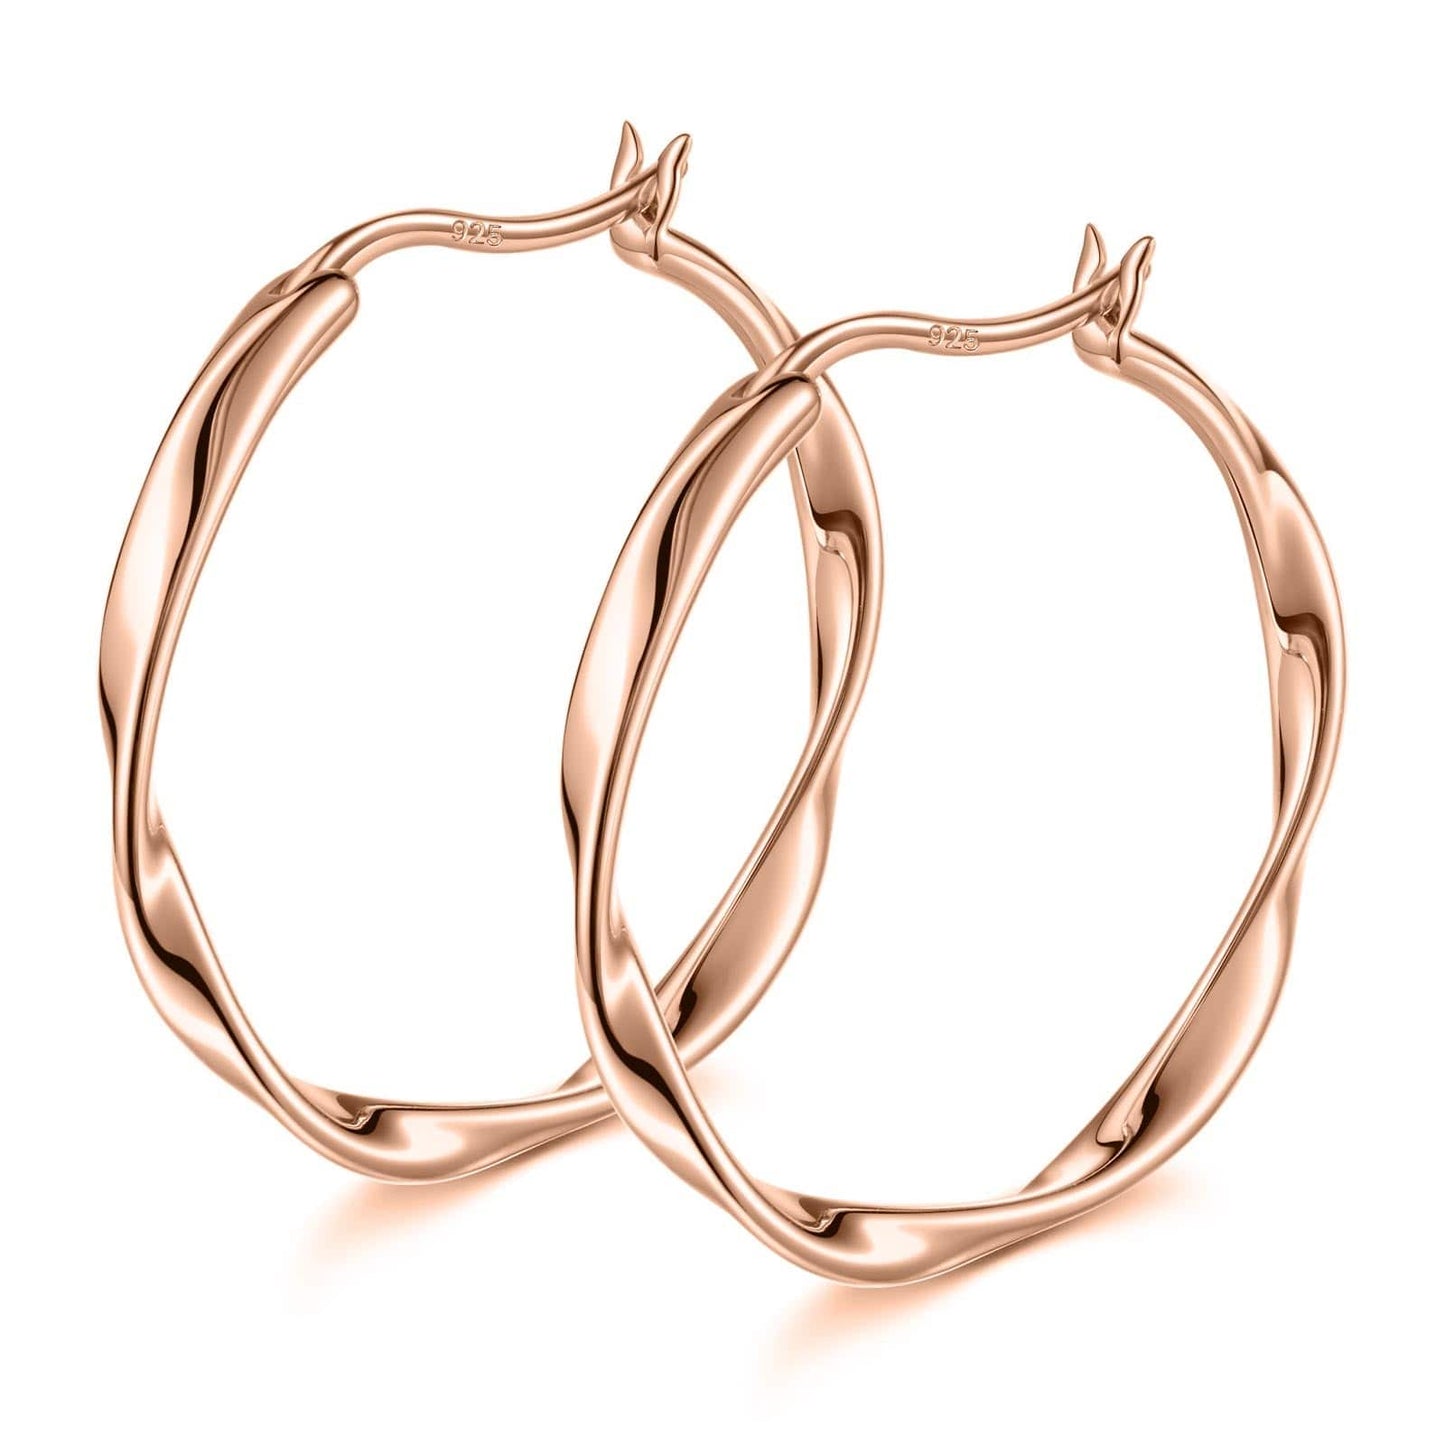 Tarnish-resistant Silver L Size Classic Hoop Earrings with Sterling Silver Ear Post In Rose Gold Plated